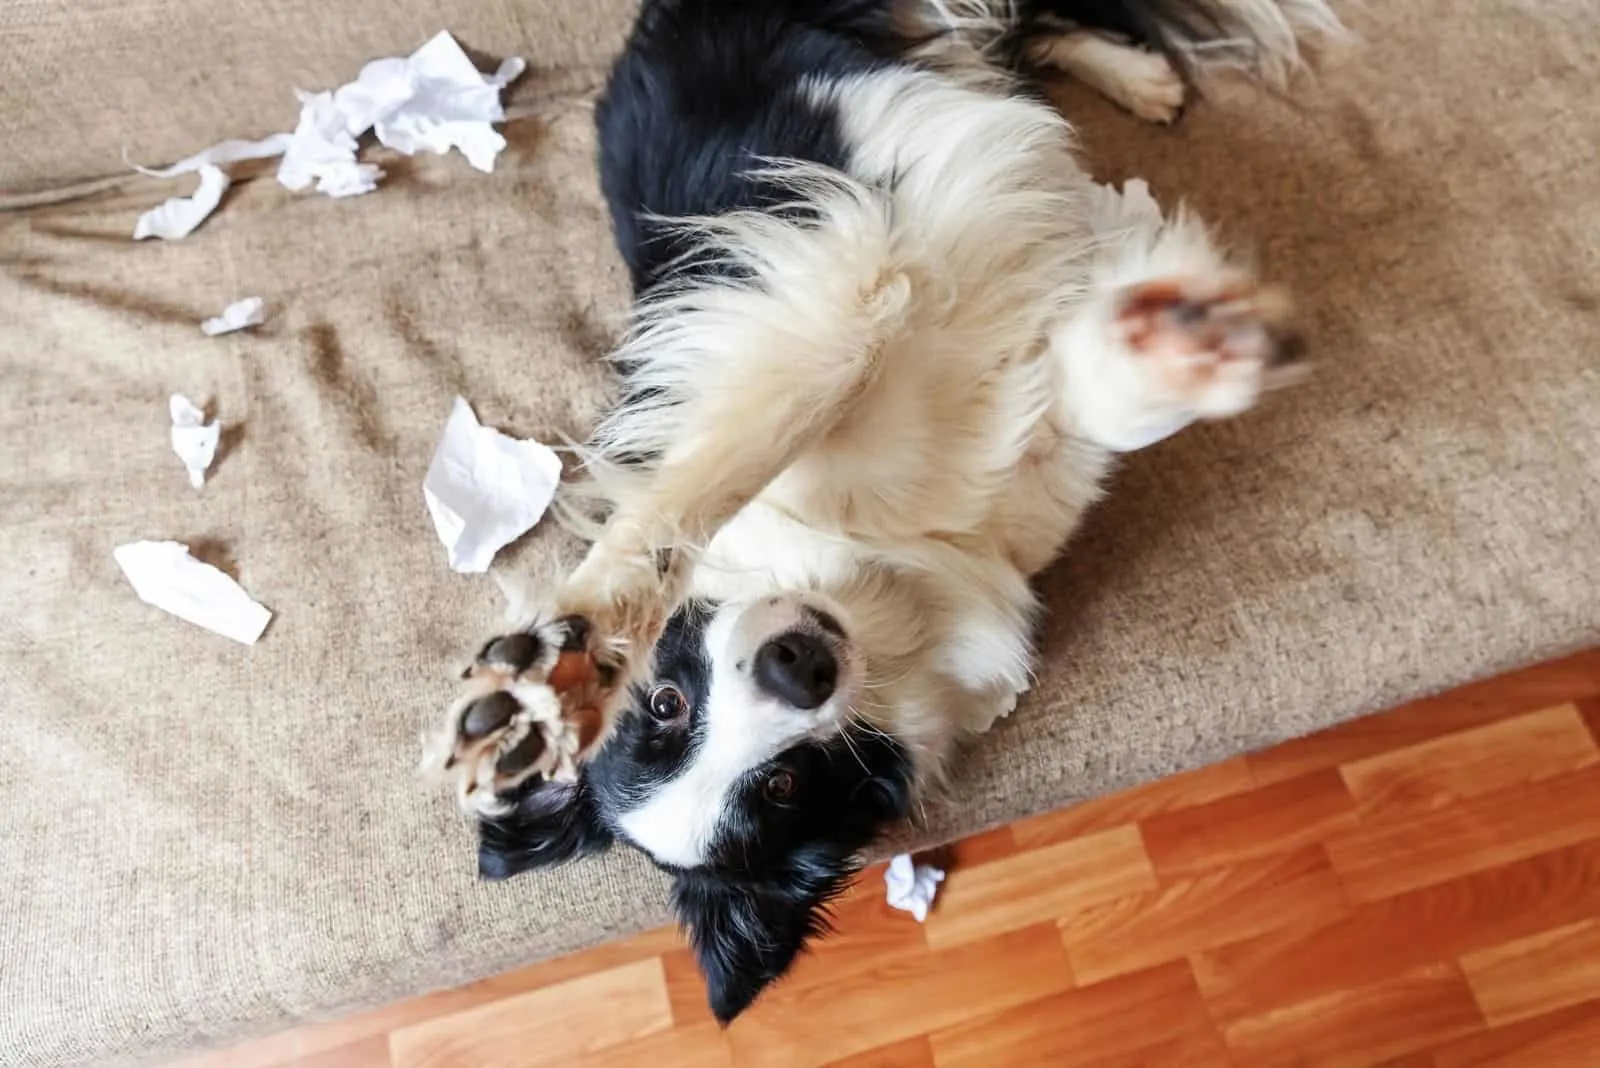 naughty playful puppy playing mischief with toilet paper